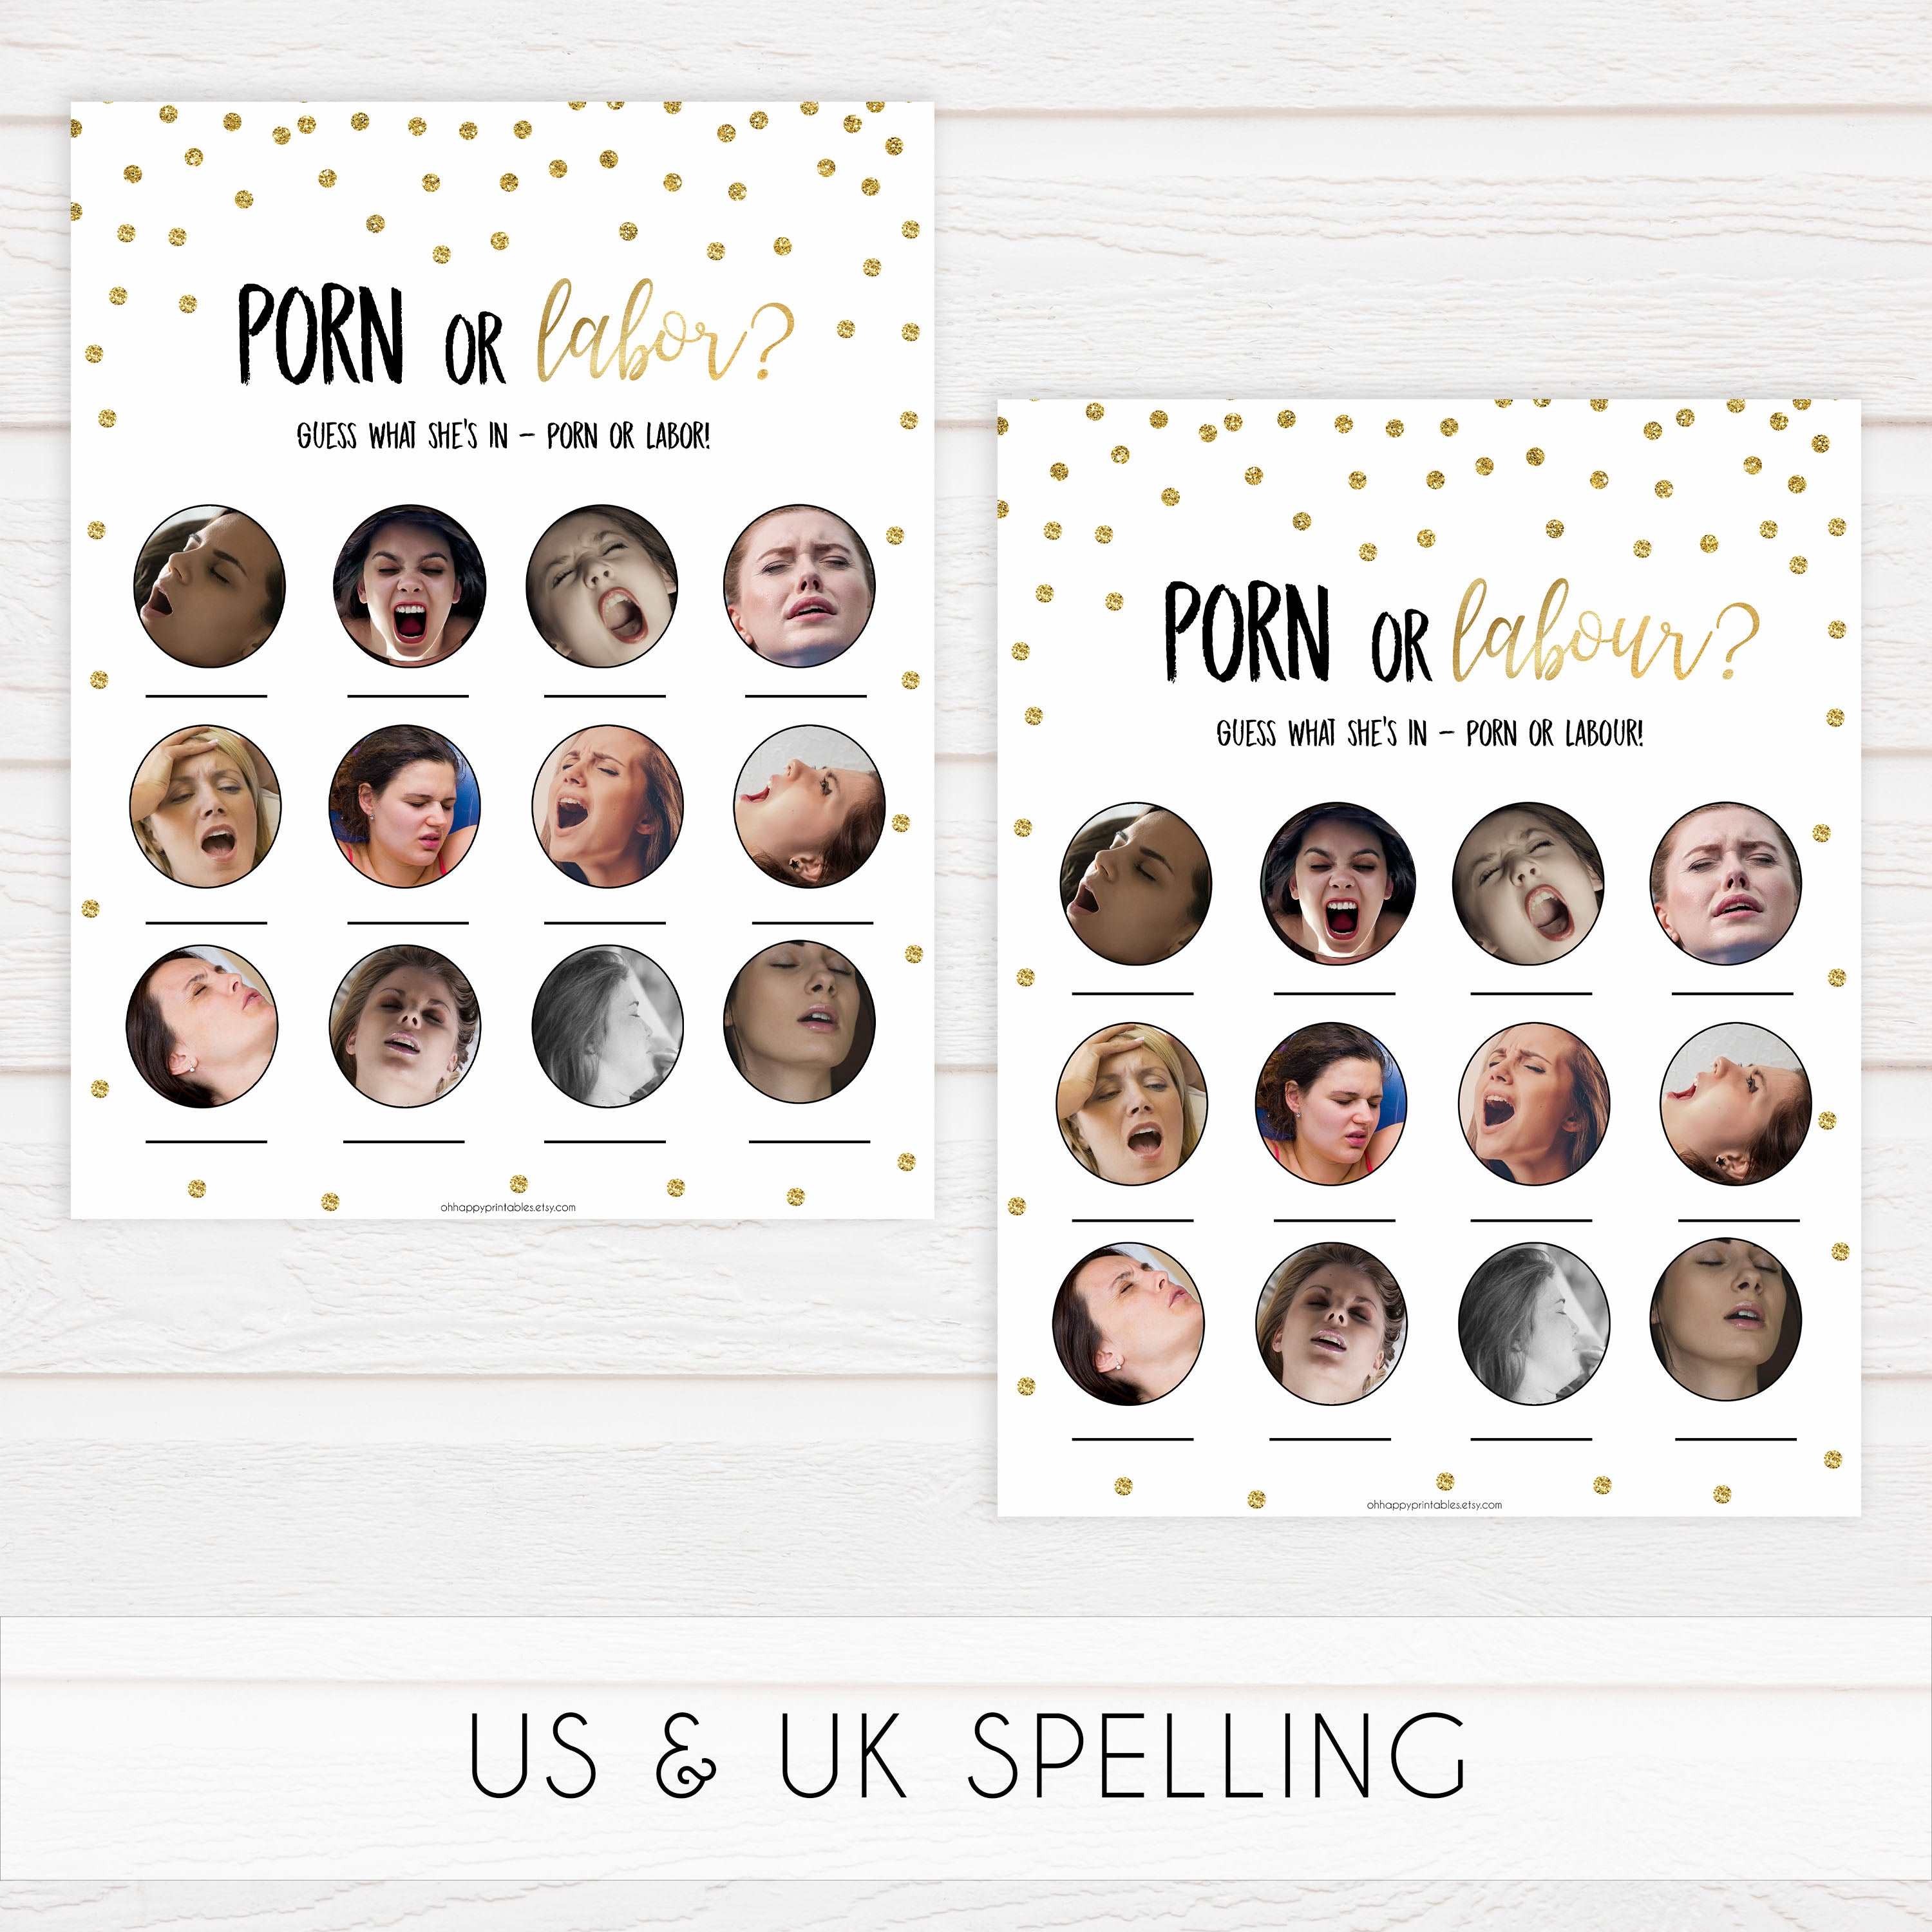 gold glitter baby shower games, printable baby games, porn or labor game, baby bump or beer belly game, 2 in 1 games.  Best baby games online, top baby games, fun baby games